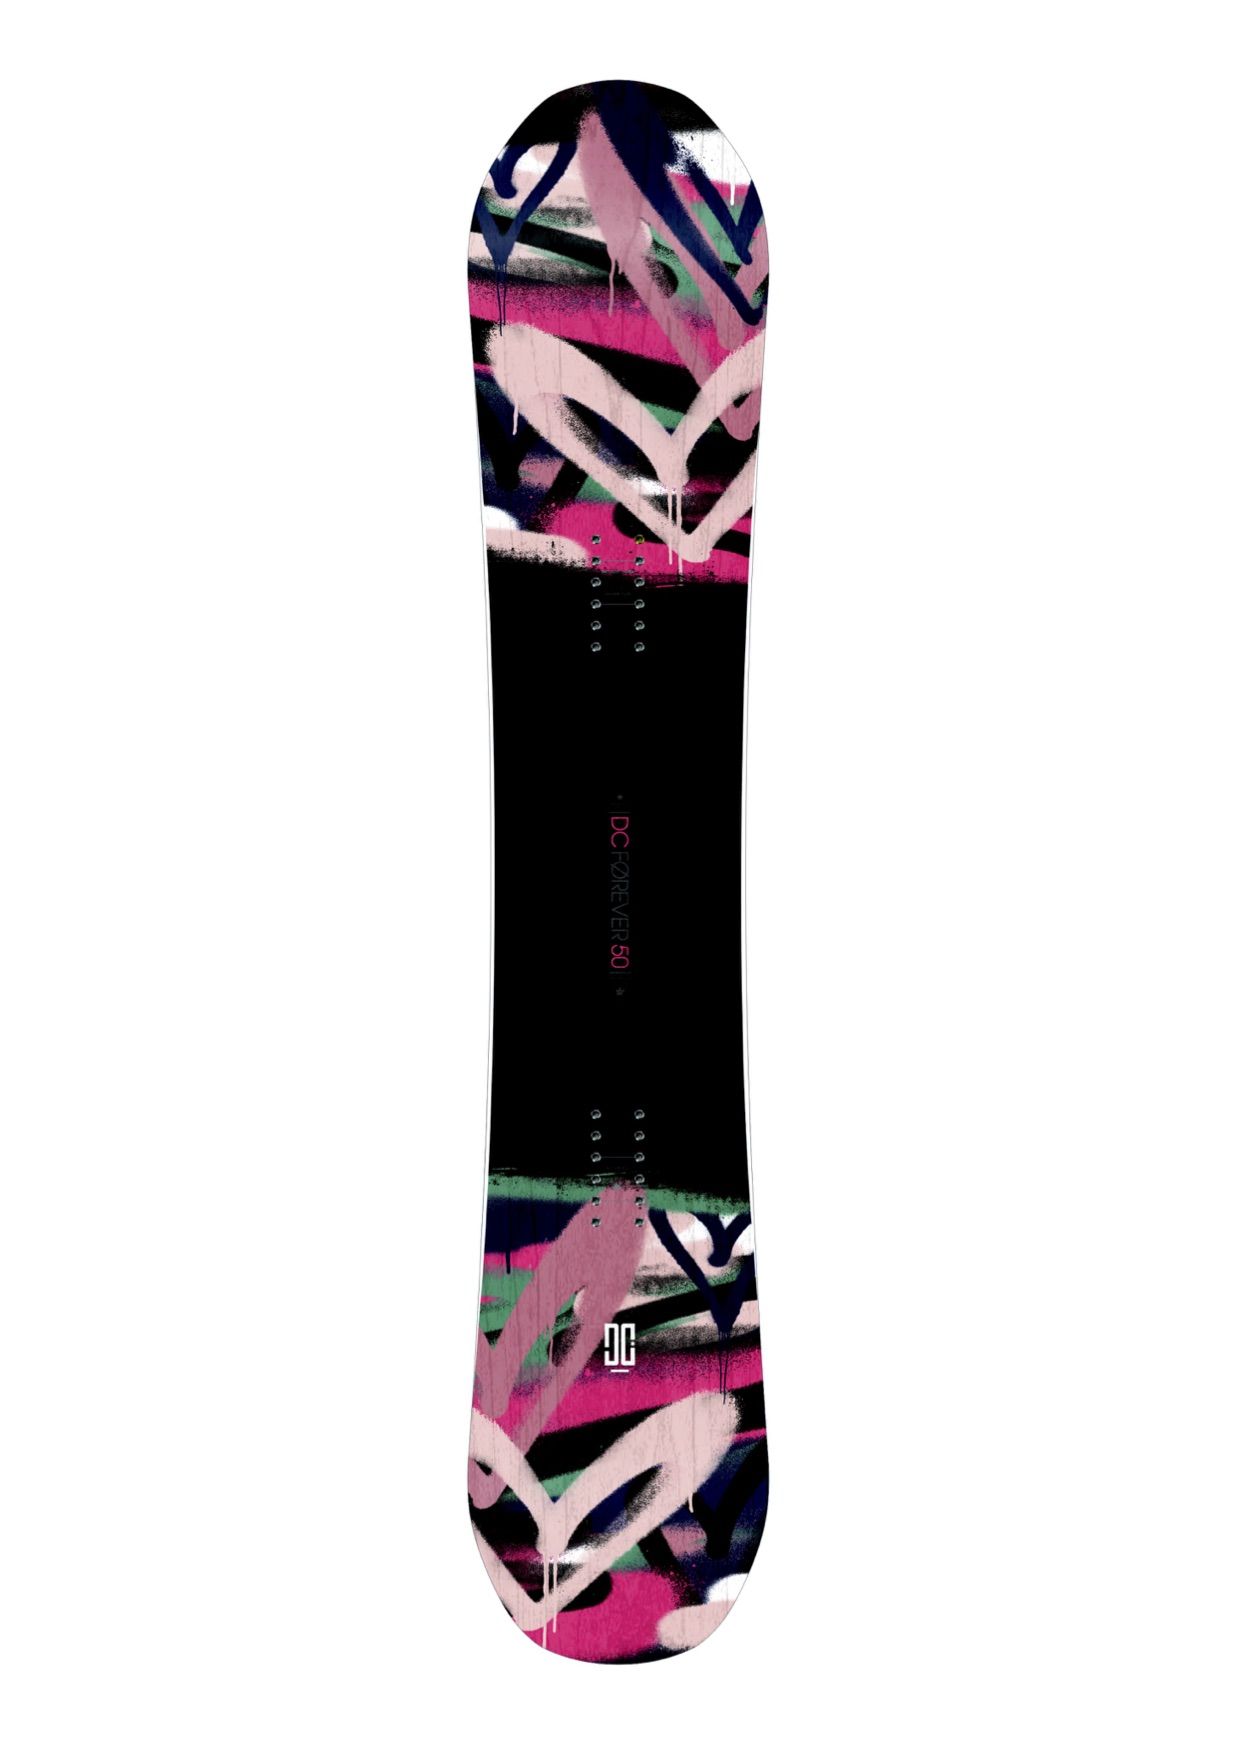 Pack Planche de snowboard Forever + Fixations